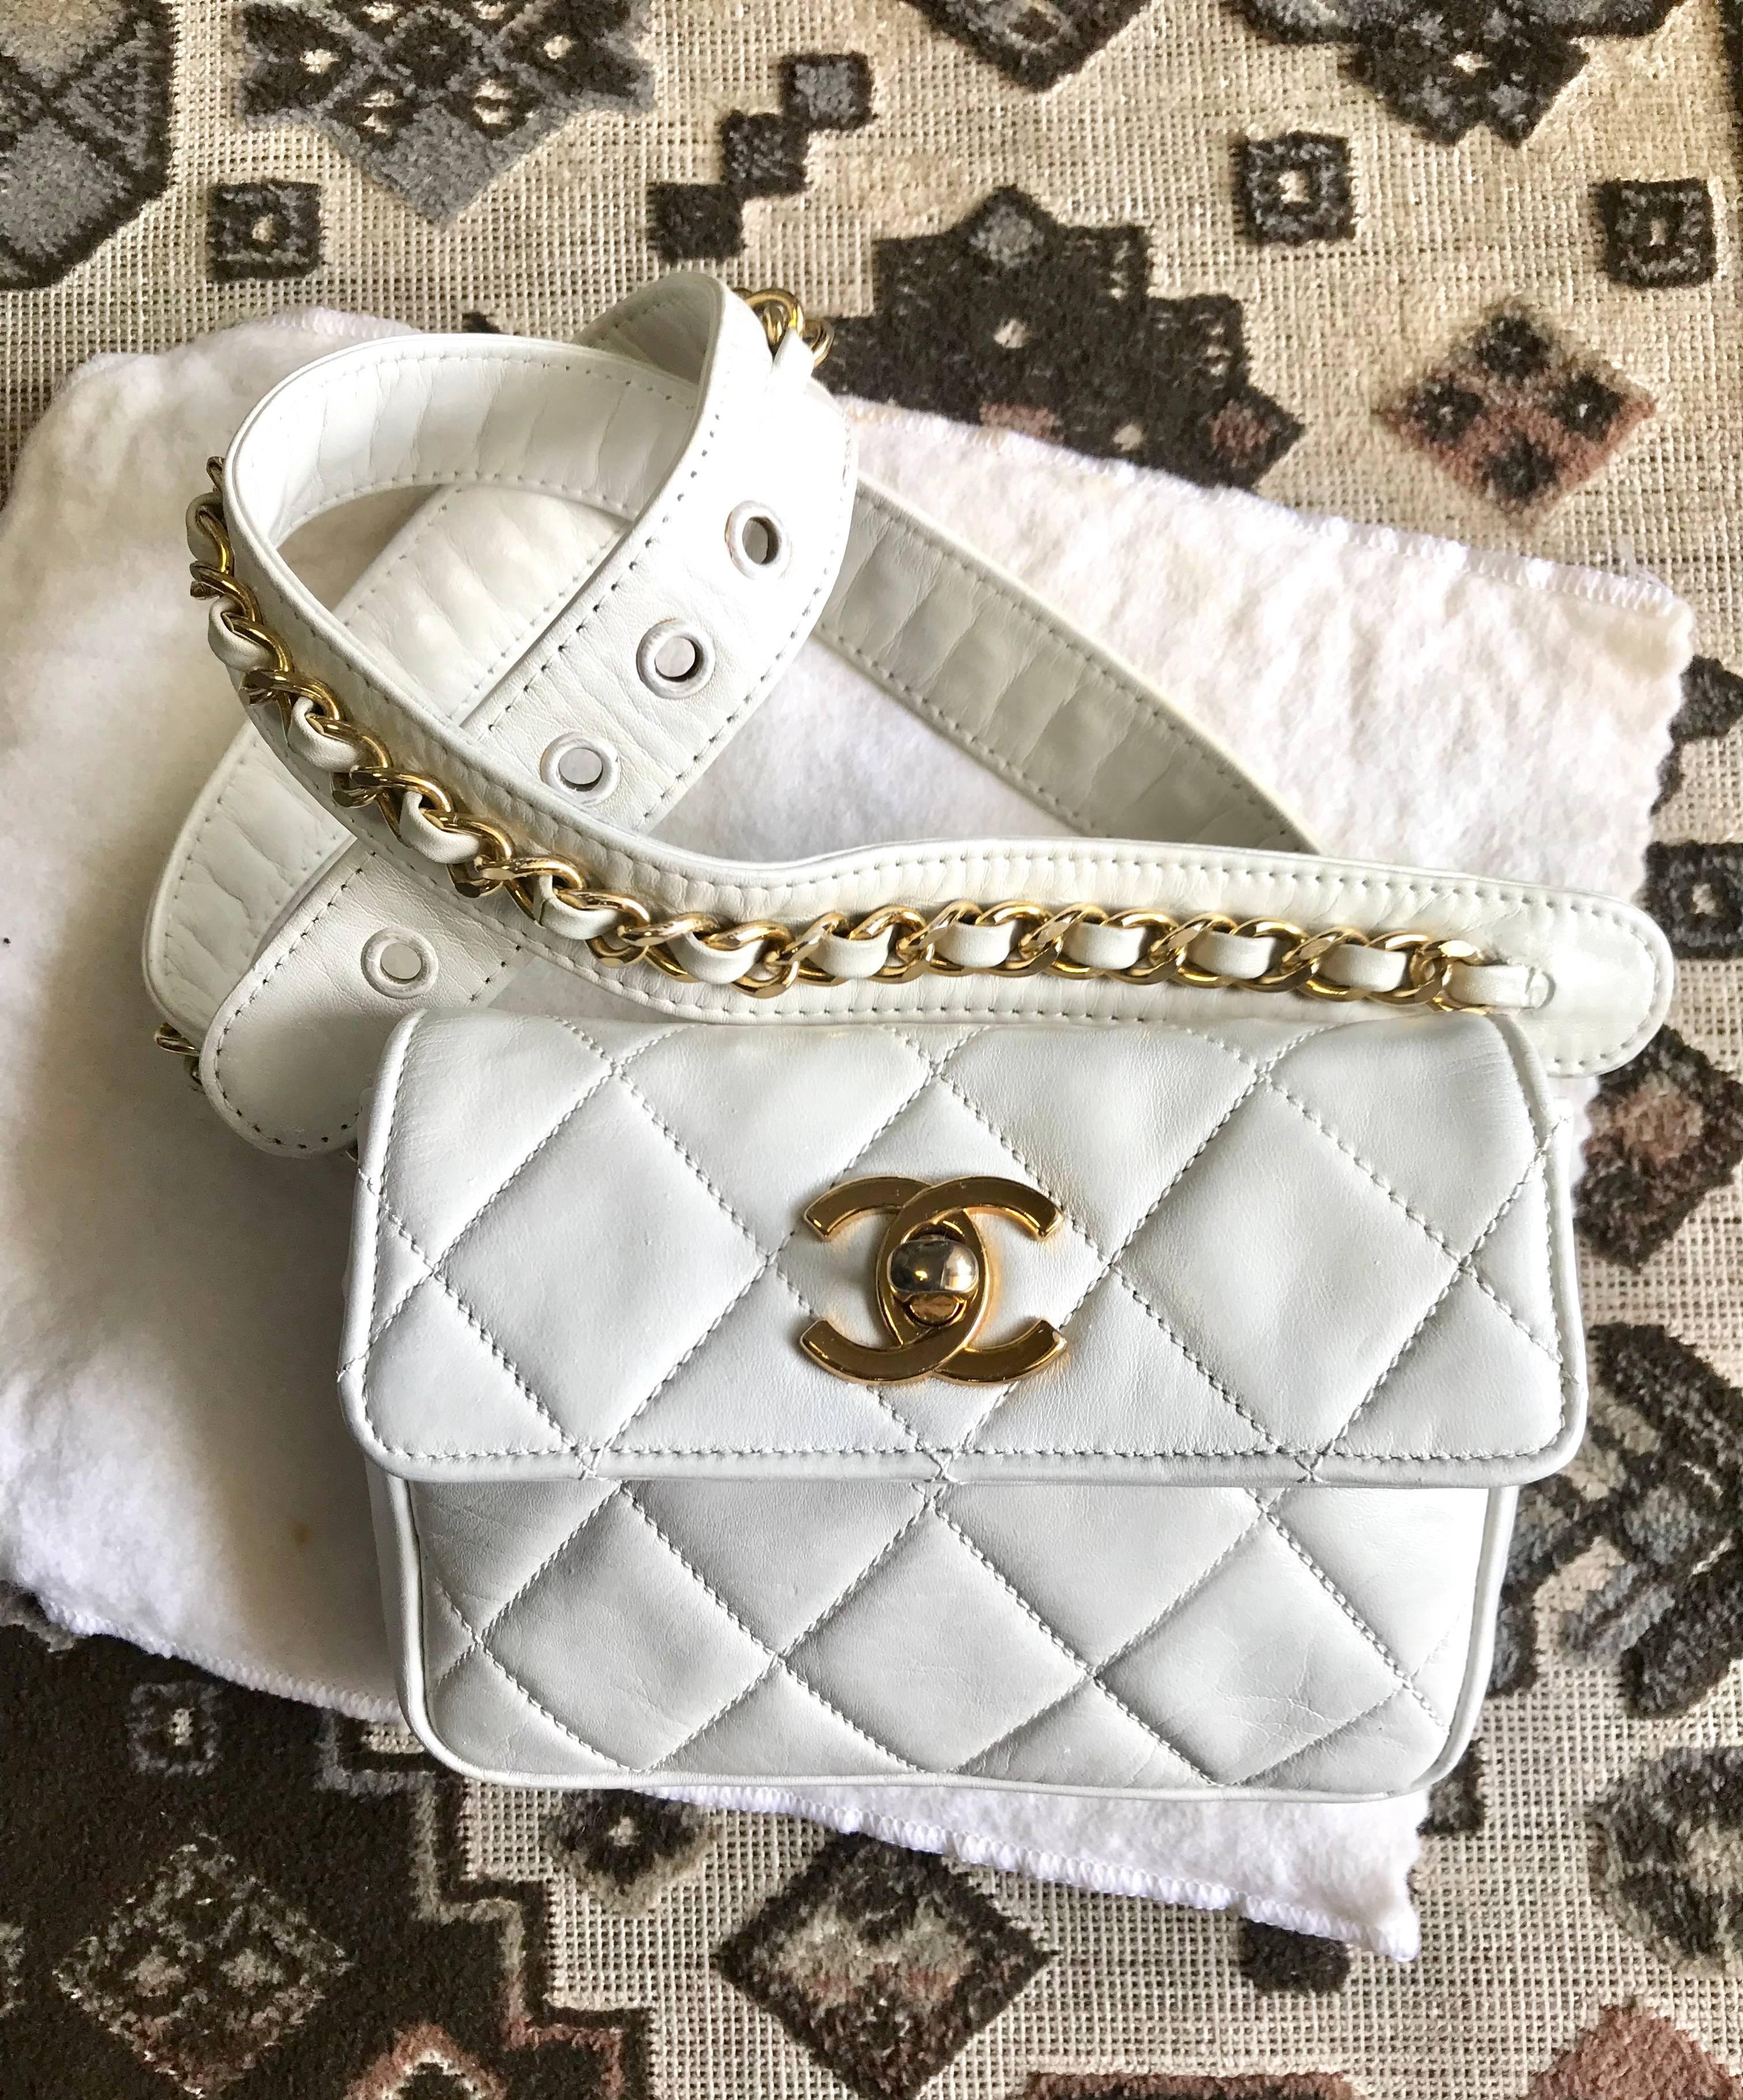 1980s. Vintage Chanel white leather waist purse, fanny pack, hip bag with gold CC closure and chain belt.  Good for waist size 30